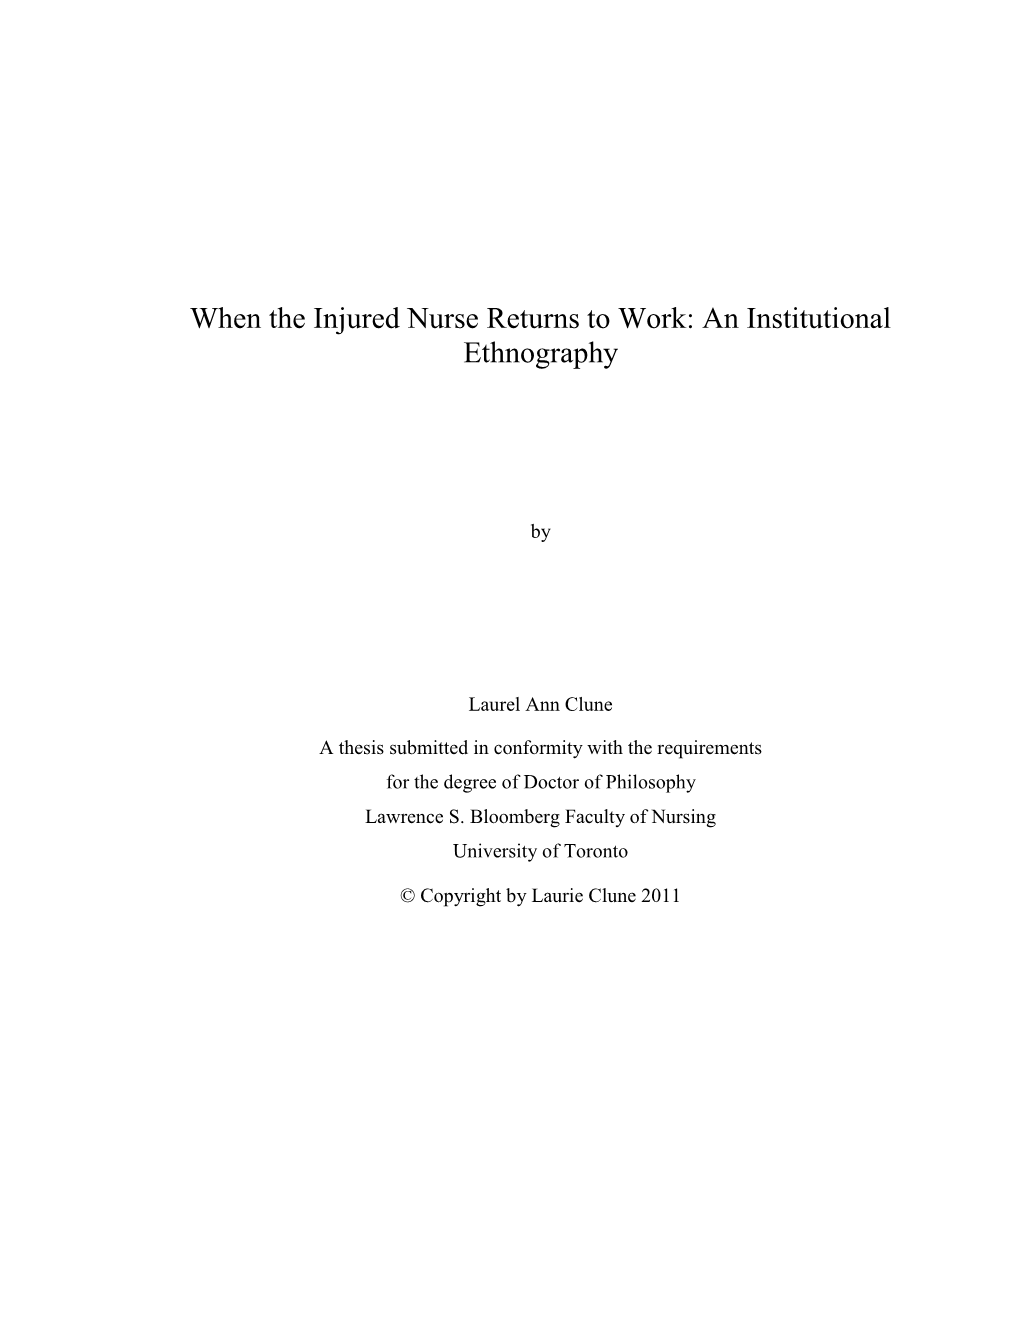 When the Injured Nurse Returns to Work: an Institutional Ethnography